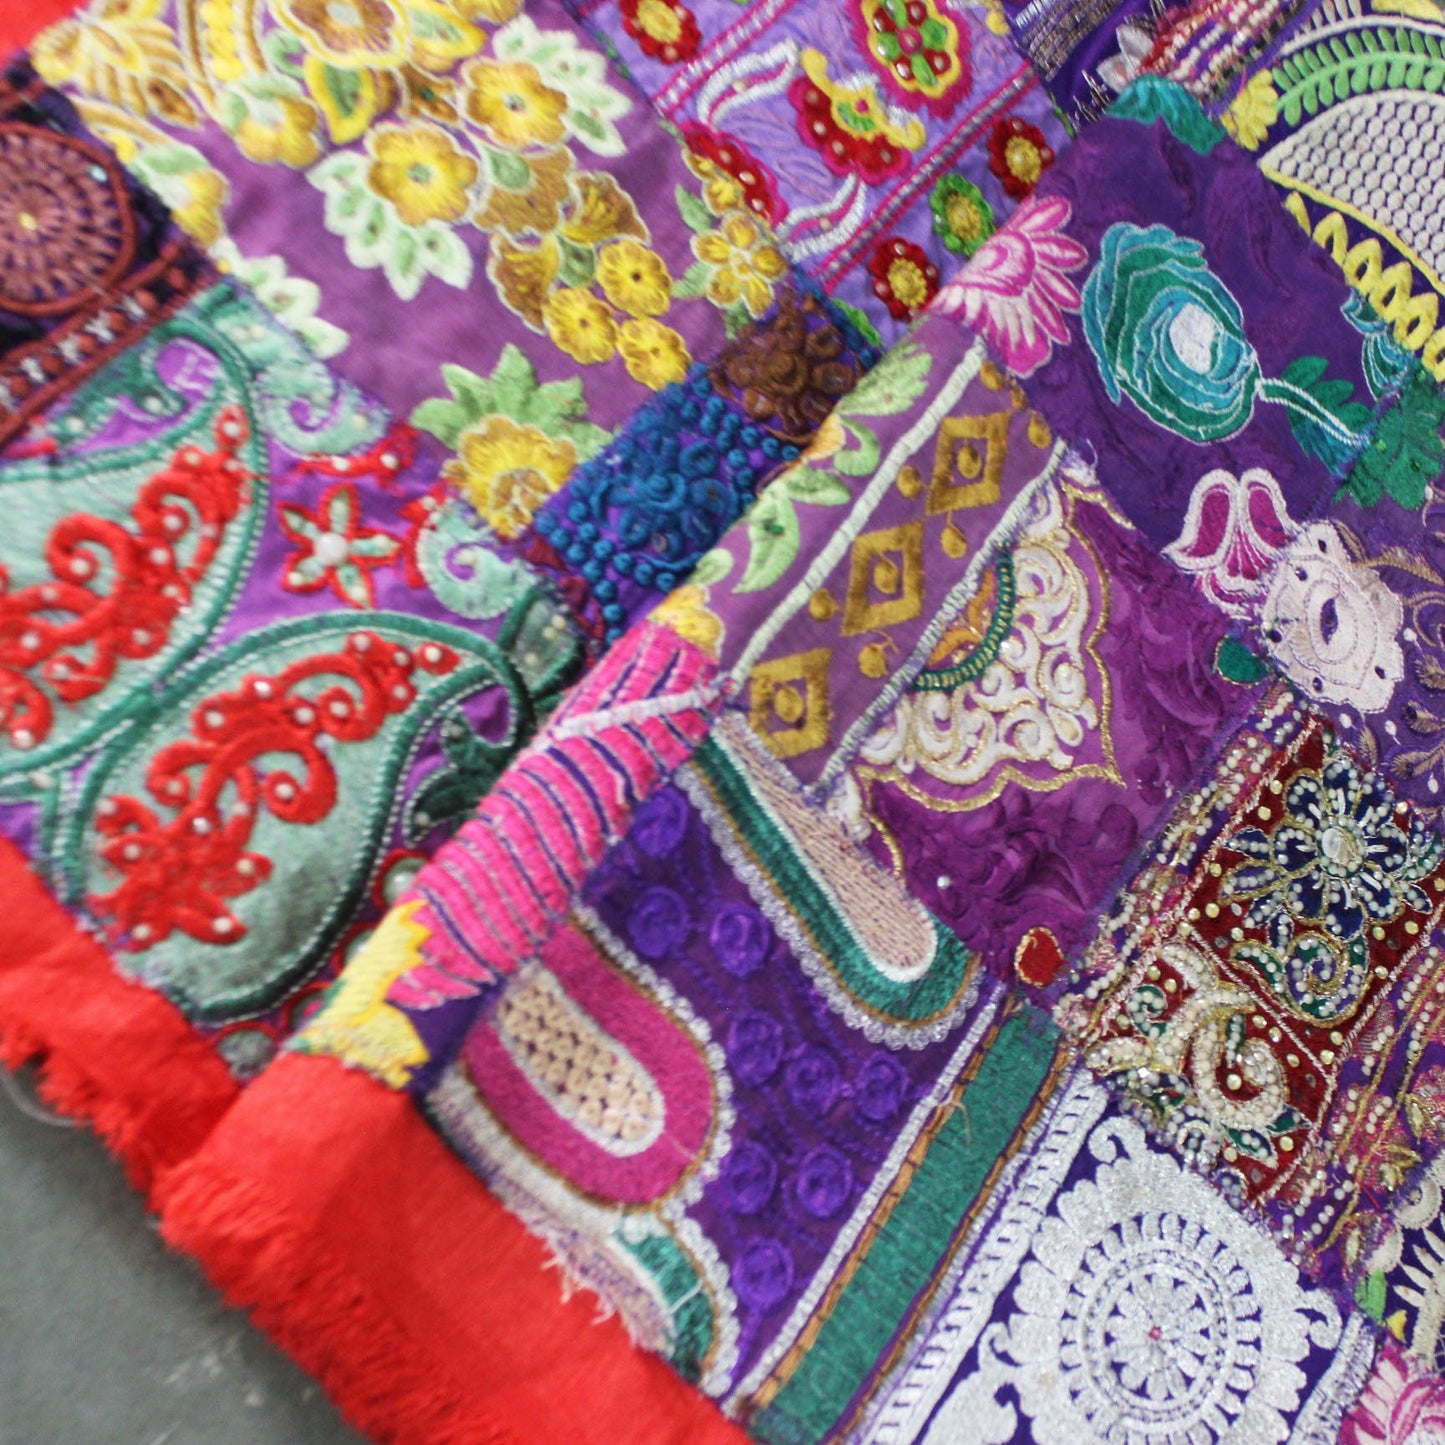 Purple Embellished Fabric By The Yard Embroidered Indian Fabric Boho Indian Textile Fabric Patchwork Vintage Sewing Project Recycled Fabrics